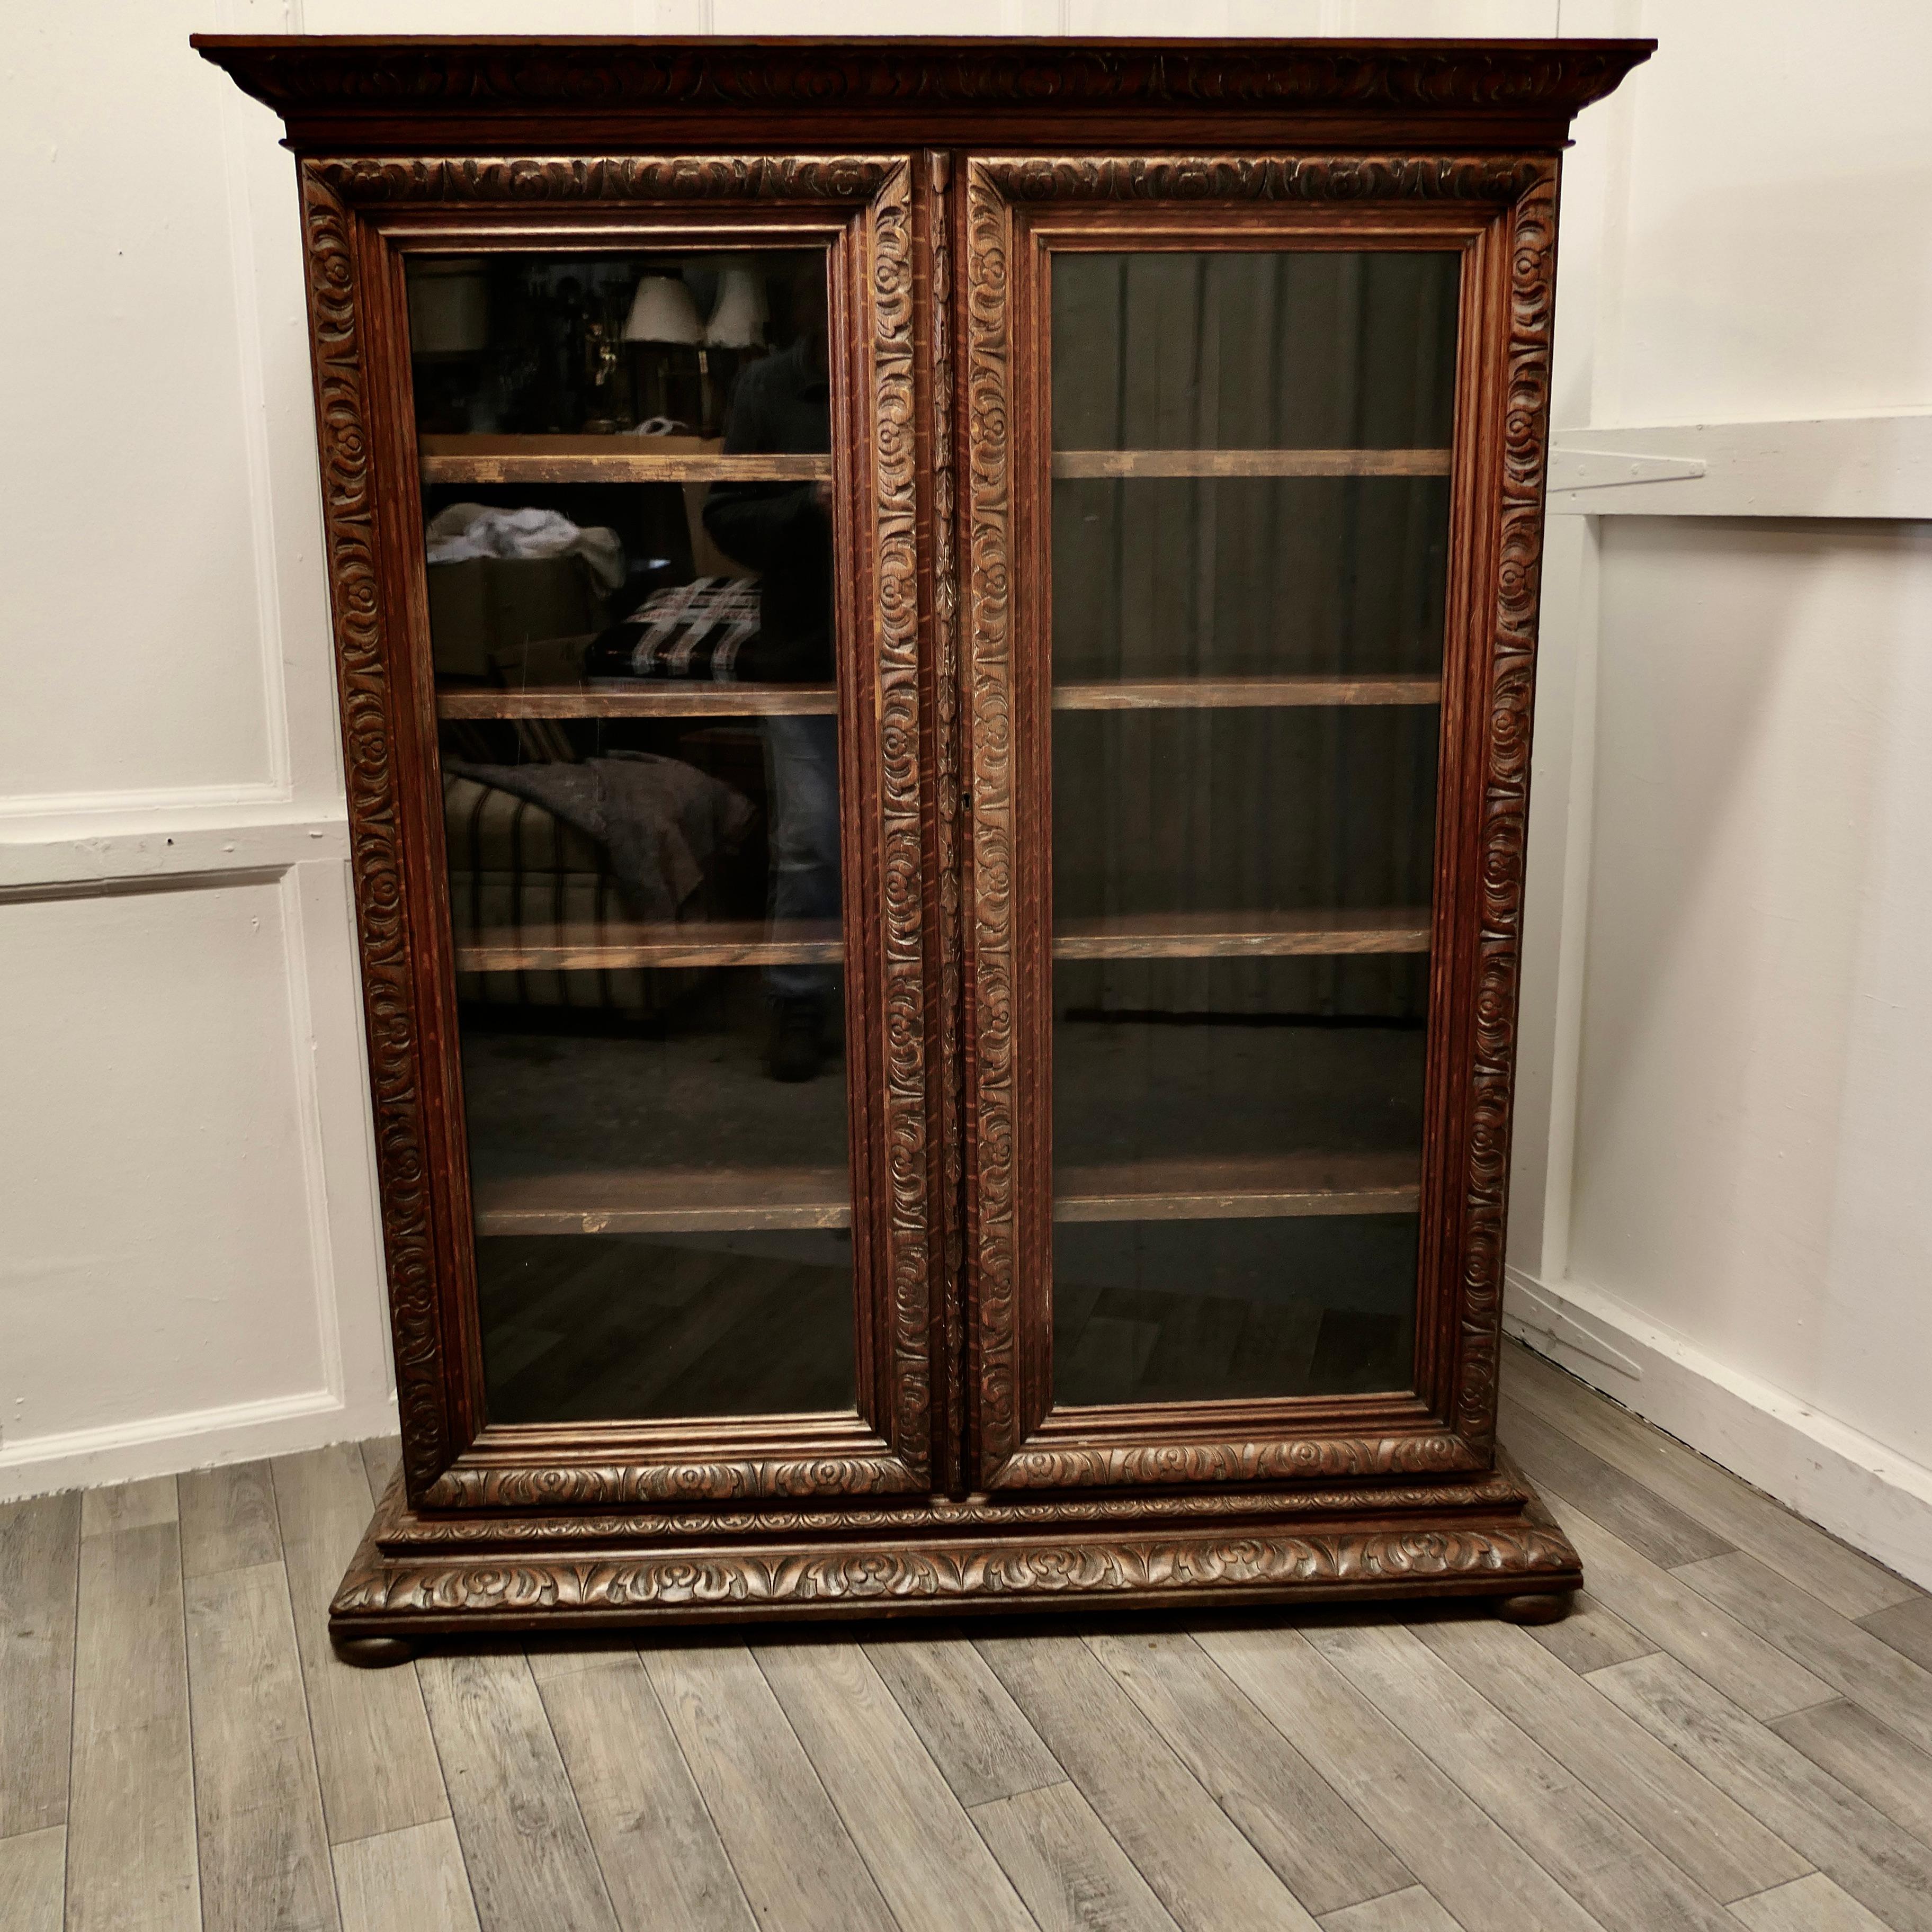 Fine Quality 19th century carved oak glazed bookcase.

This is a very attractive piece, it has 2 glazed doors which have a deeply carved border matching the top and base carving and it stands on small bun feet 
The cabinet has 4 adjustable